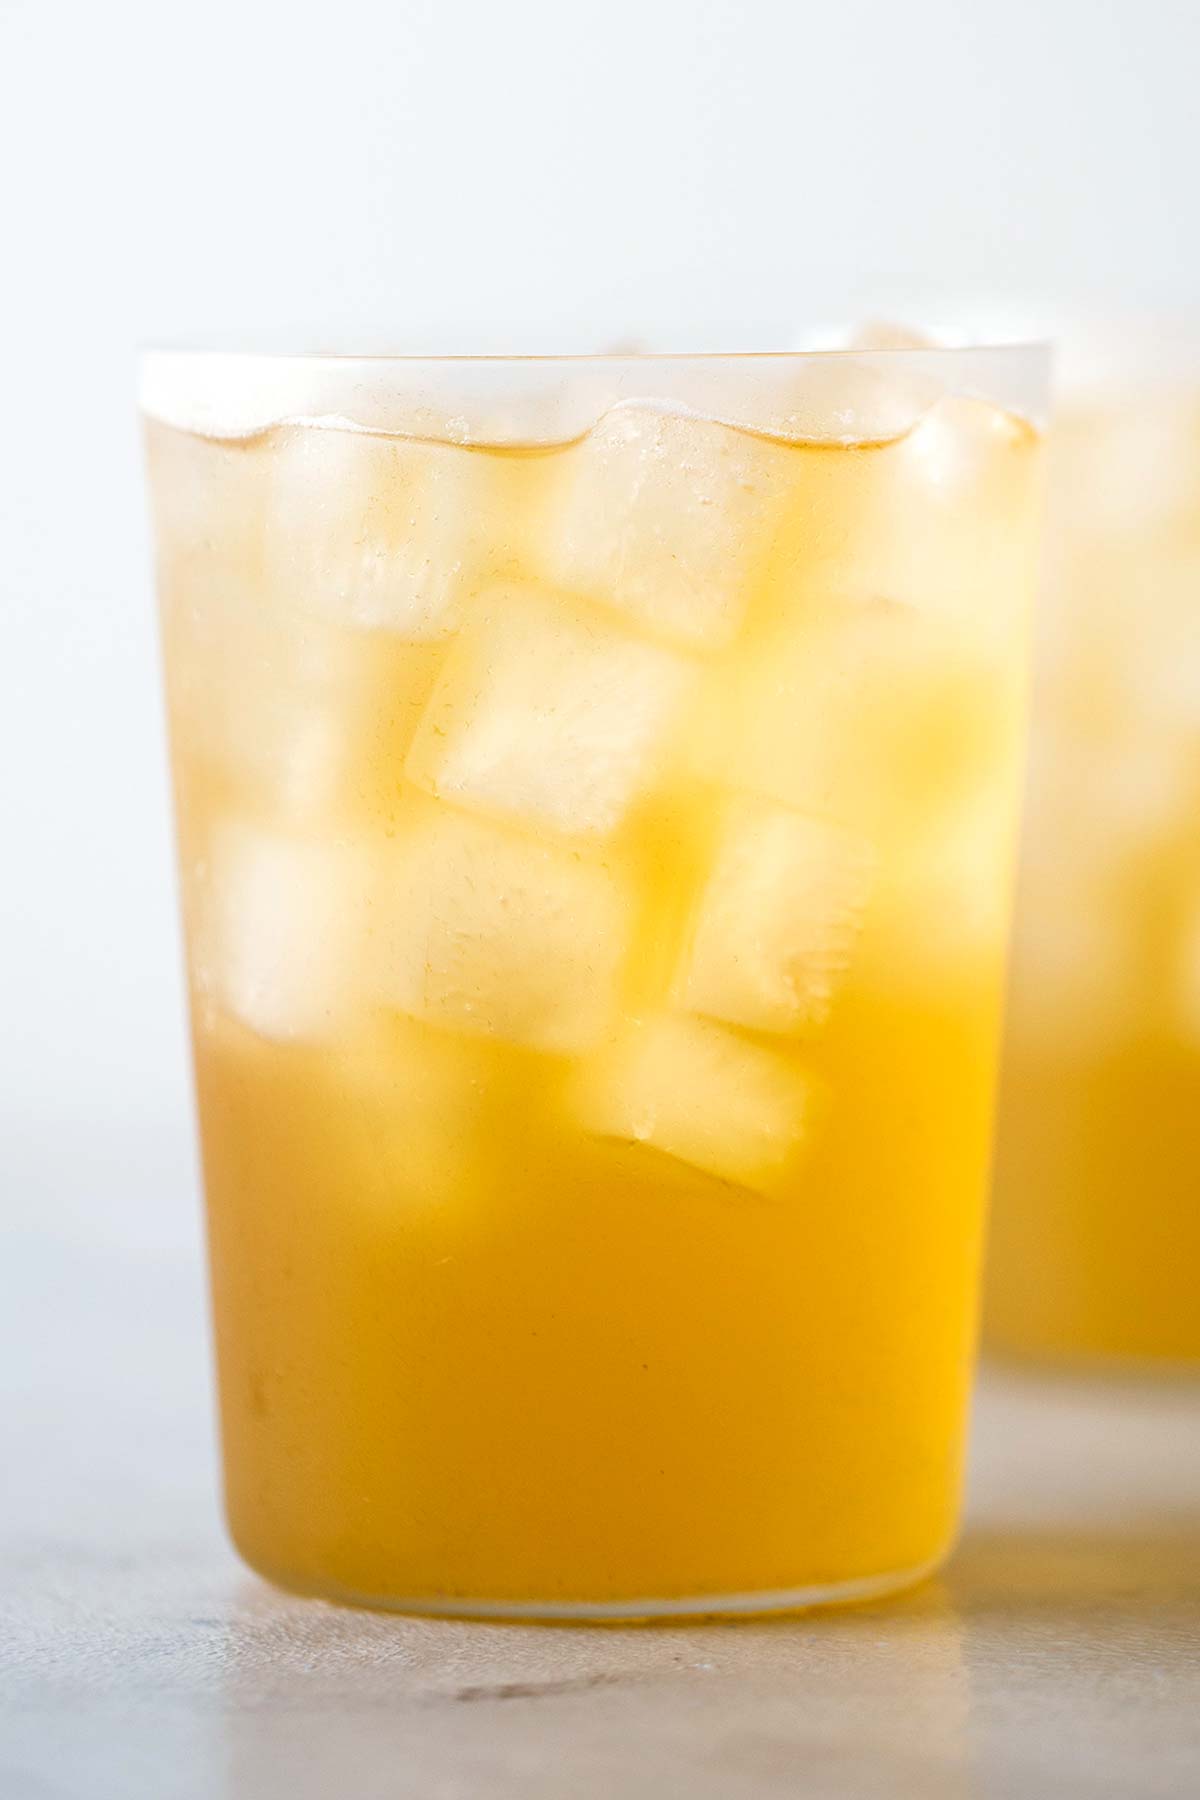 Iced green tea in a glass cup.